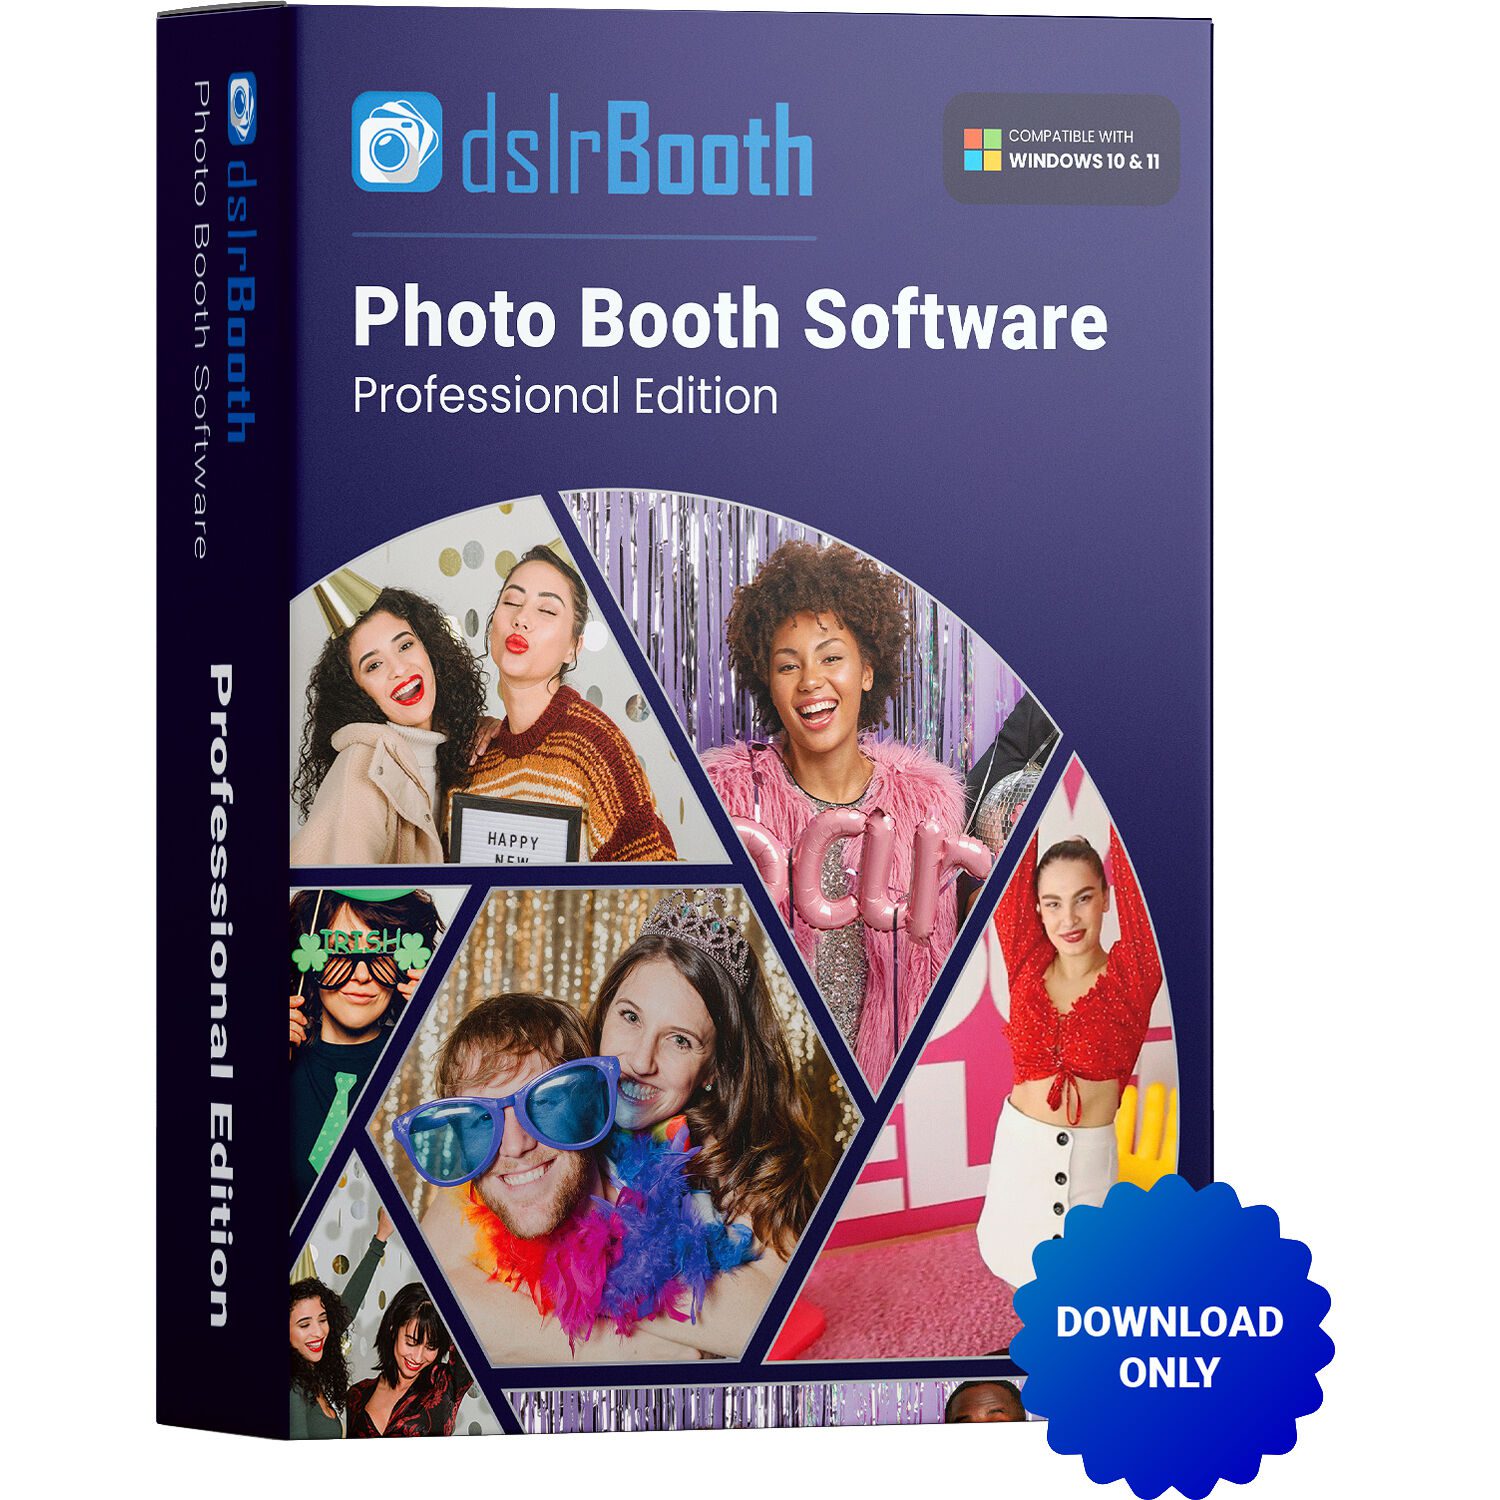 Download dslrBooth Photo Booth Professional Full Version